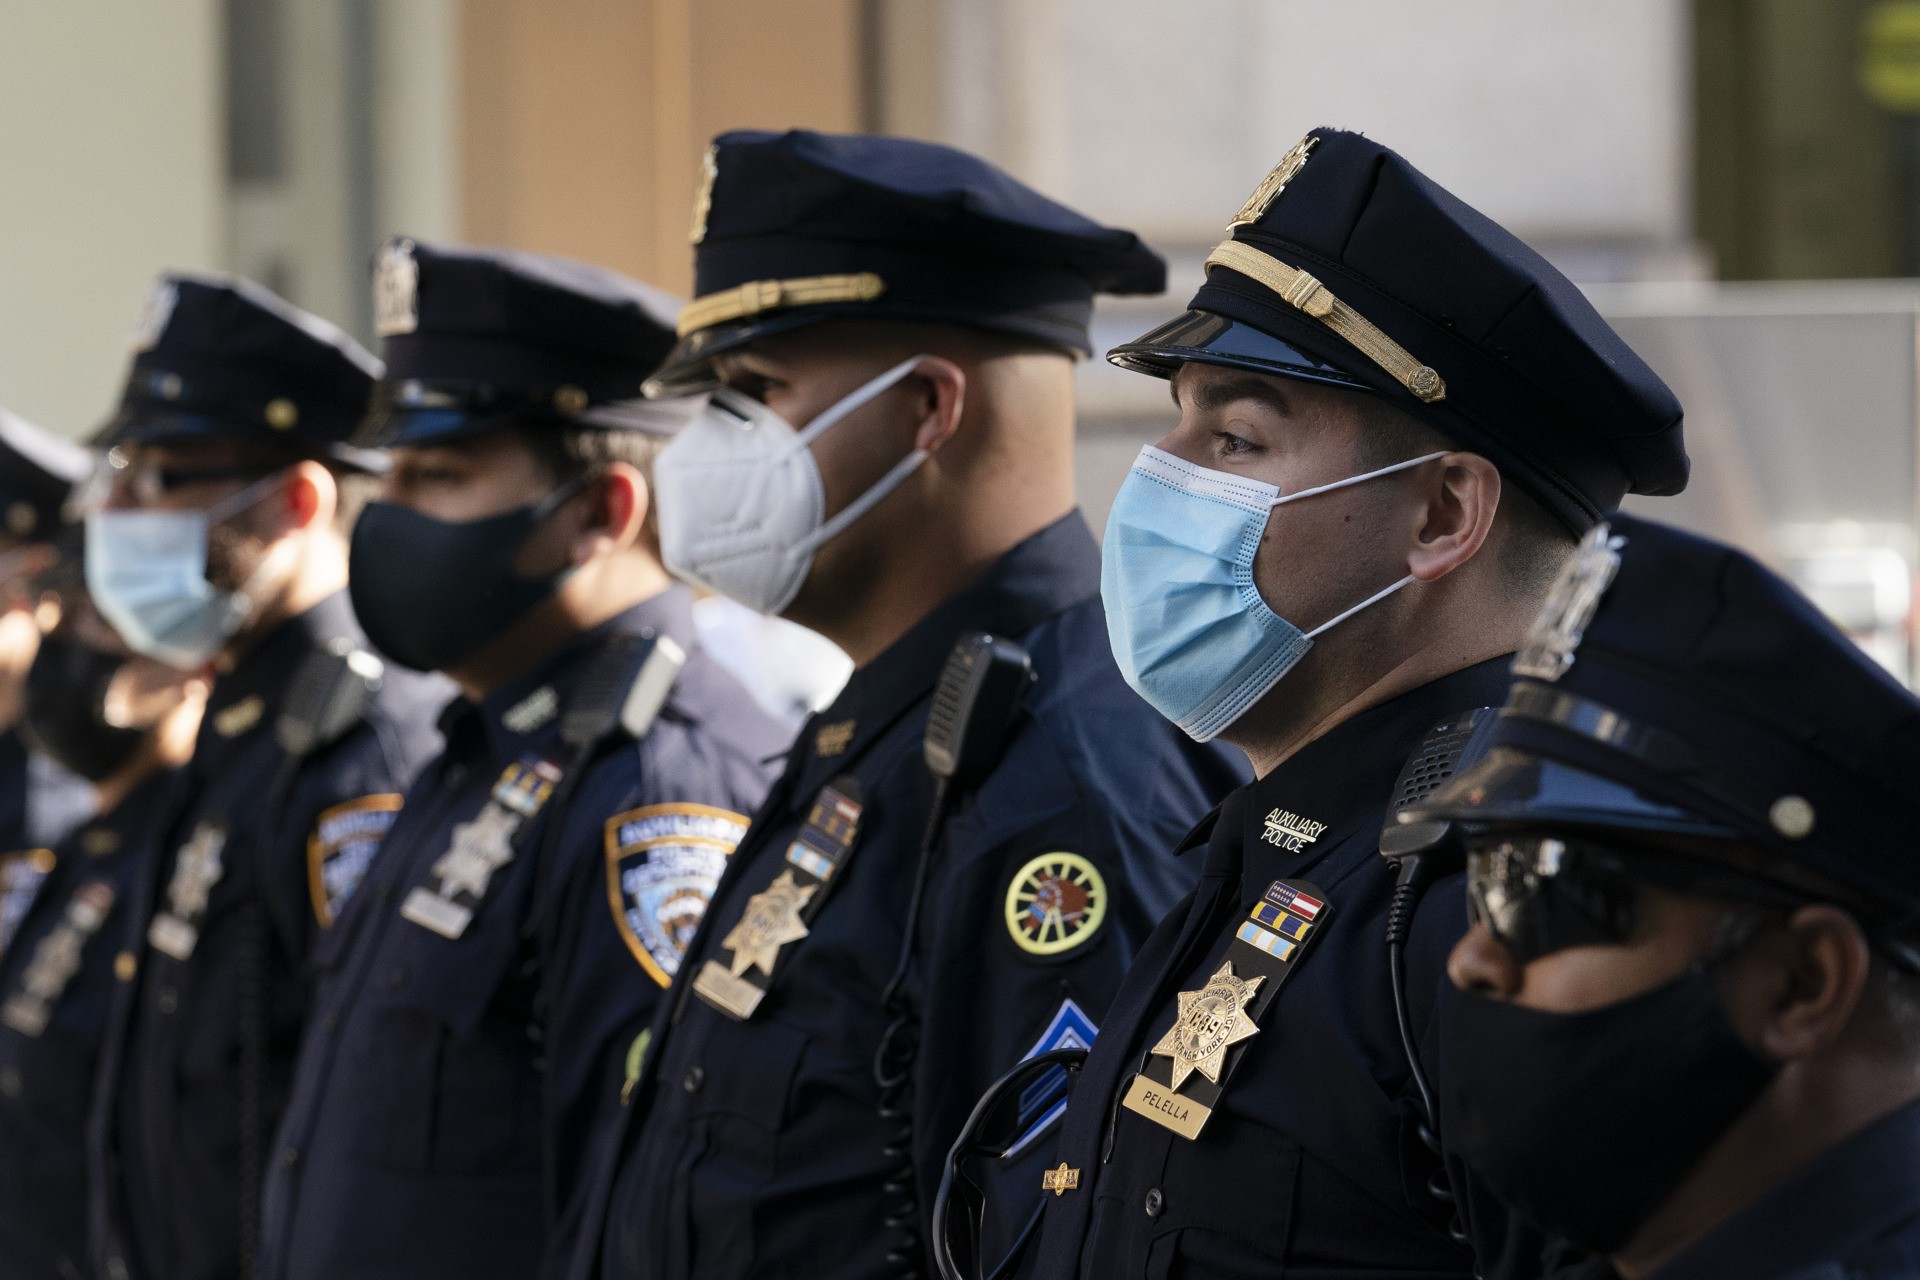 FILE - In this Oct. 5, 2020, file photo, New York Police Department officers in masks stand during a service at St. Patrick's Cathedral in New York to honor 46 colleagues who have died due to COVID-19 related illness. New York City will require police officers, firefighters and other municipal workers to be vaccinated against COVID-19 or be placed on unpaid leave, Mayor Bill de Blasio said Wednesday, Oct. 20, 2021, giving an ultimatum to public employees who’ve refused and ensuring a fight with some of the unions representing them. (AP Photo/Mark Lennihan, File)